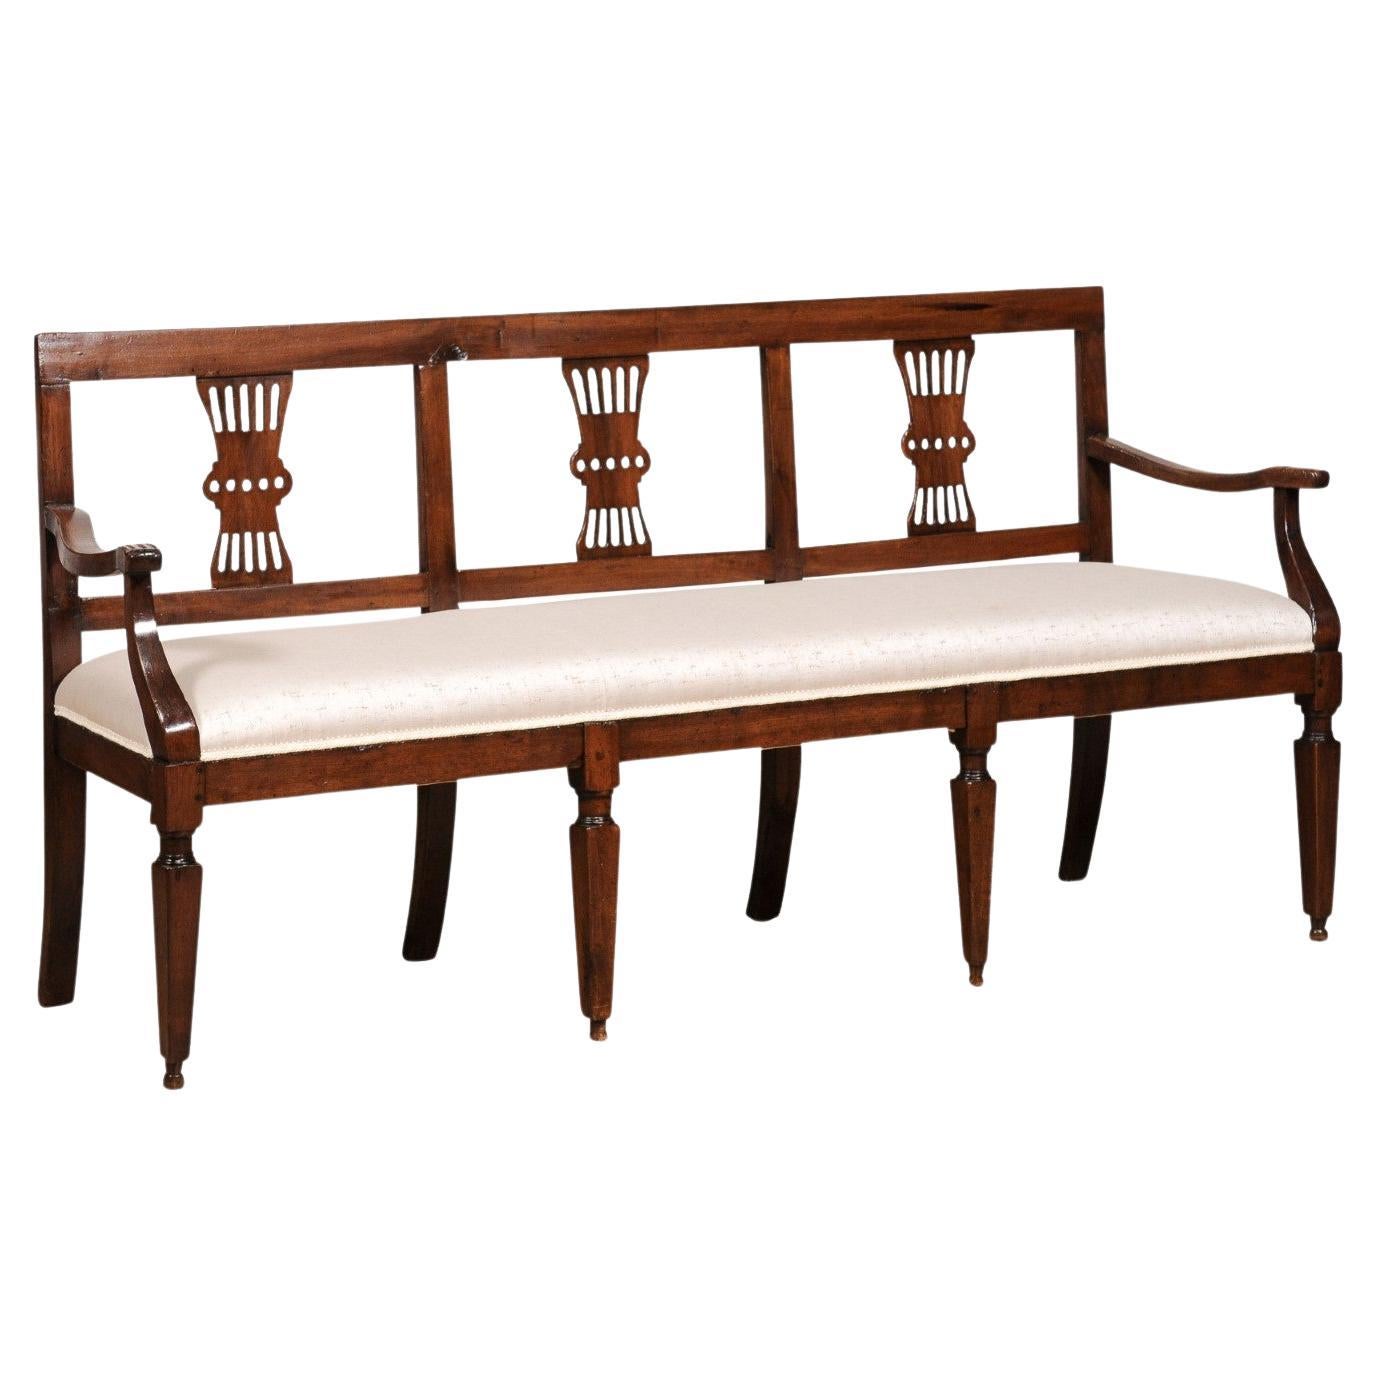 Italian 19th Century Walnut Three-Seater Bench with Carved Splats and Upholstery For Sale